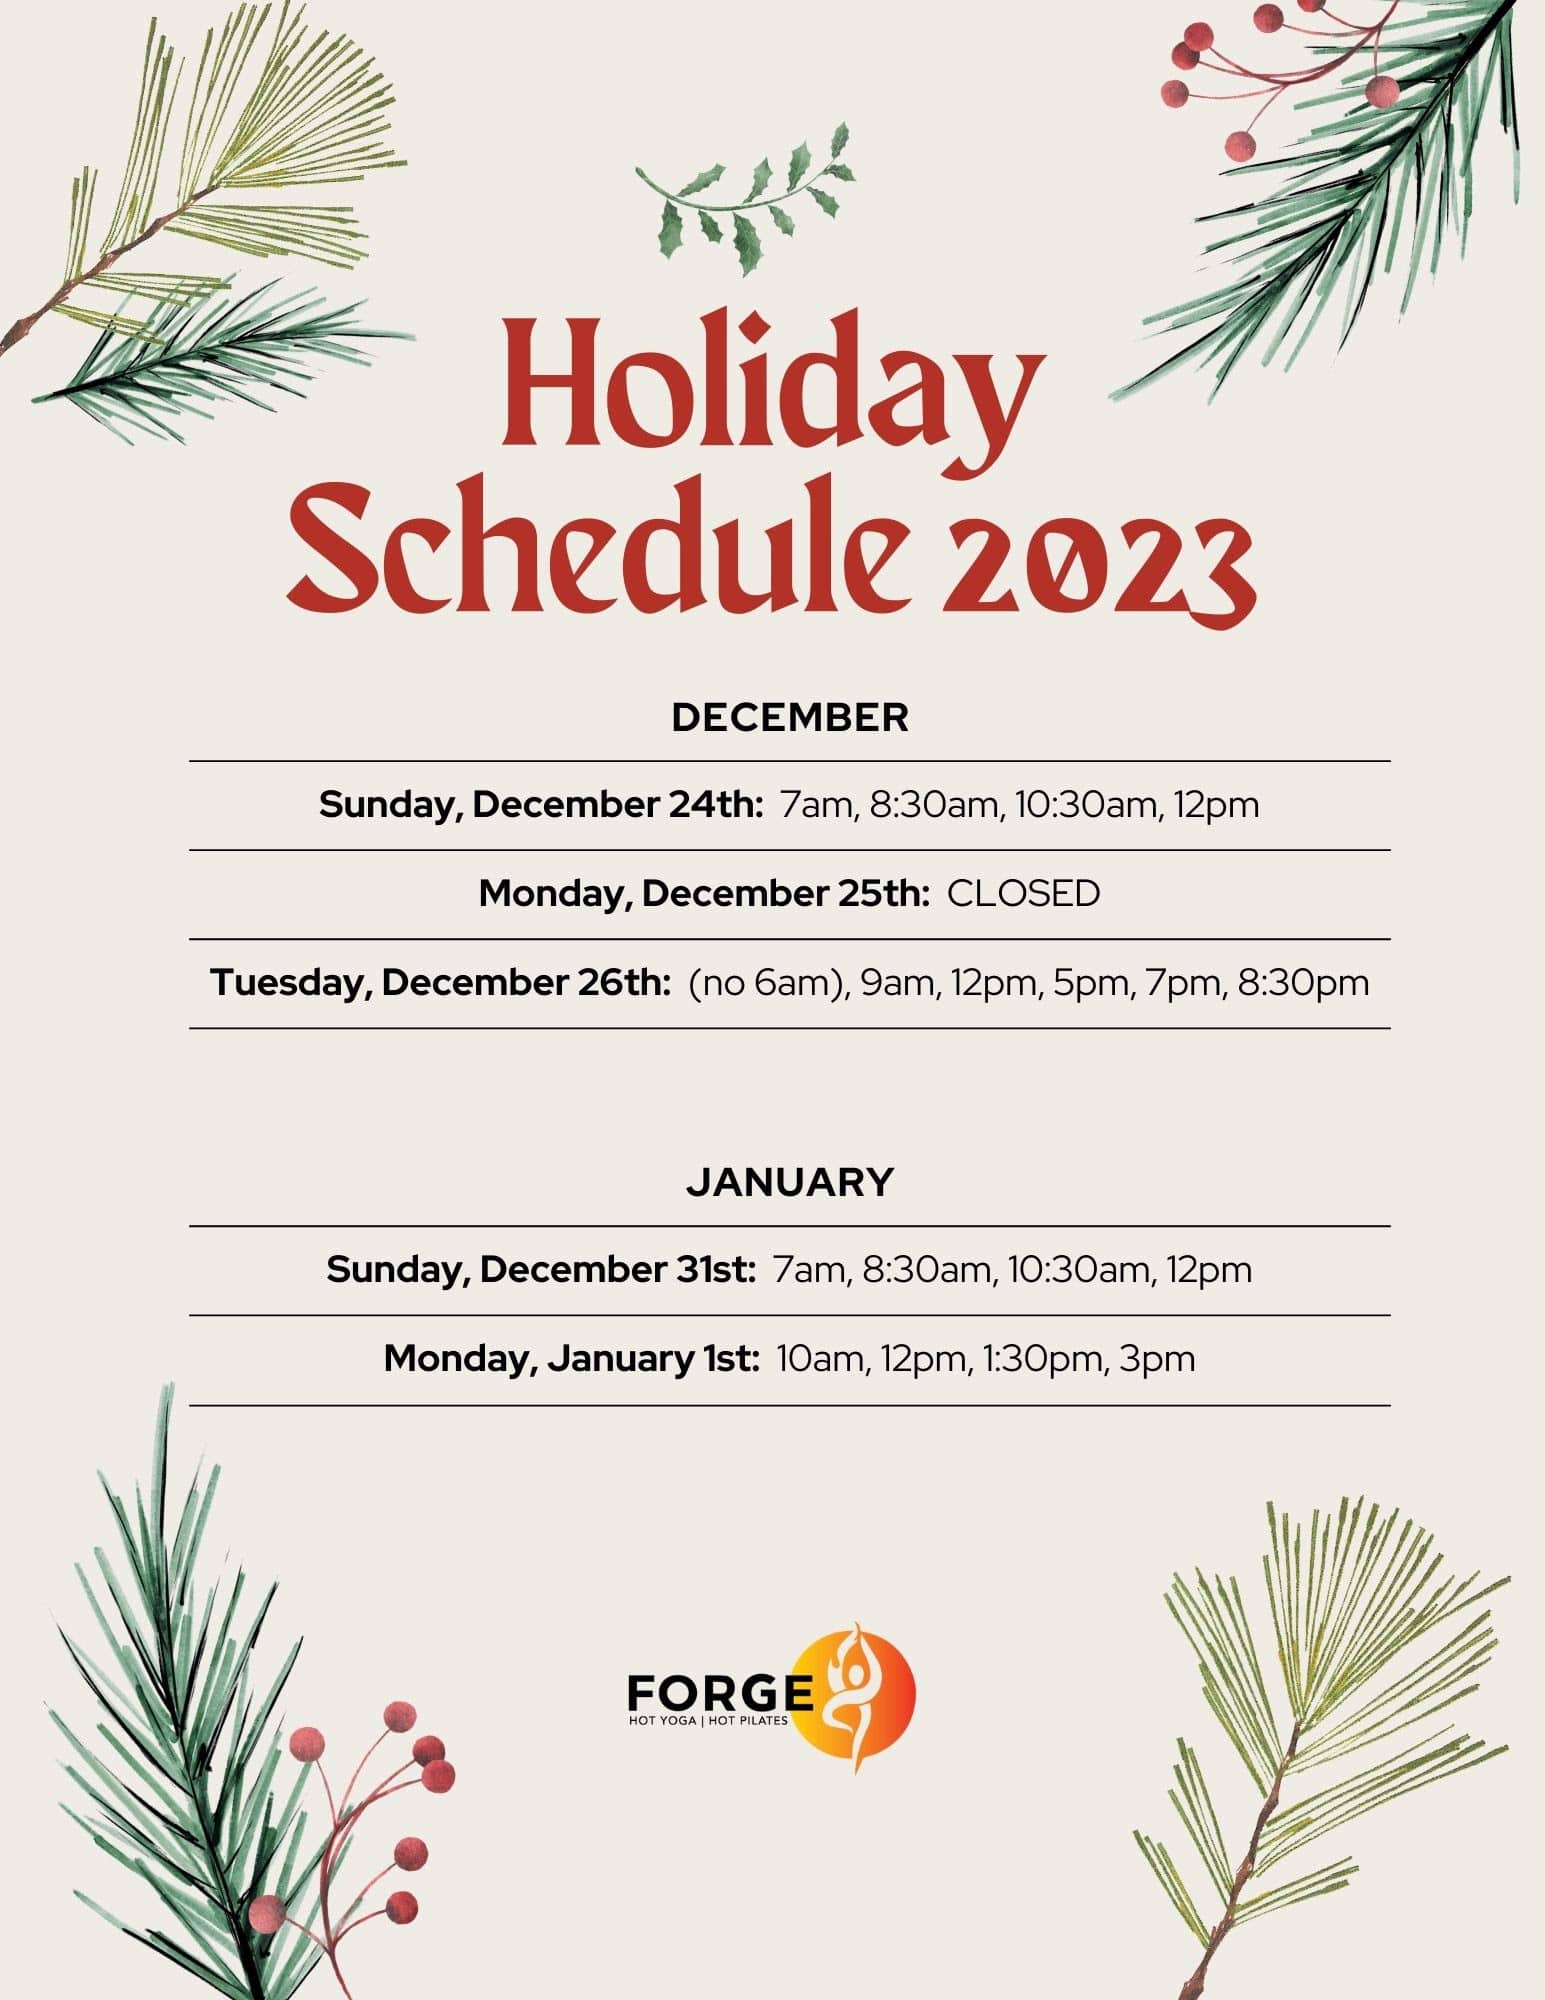 Forge Hot Yoga Holiday Schedule 2023